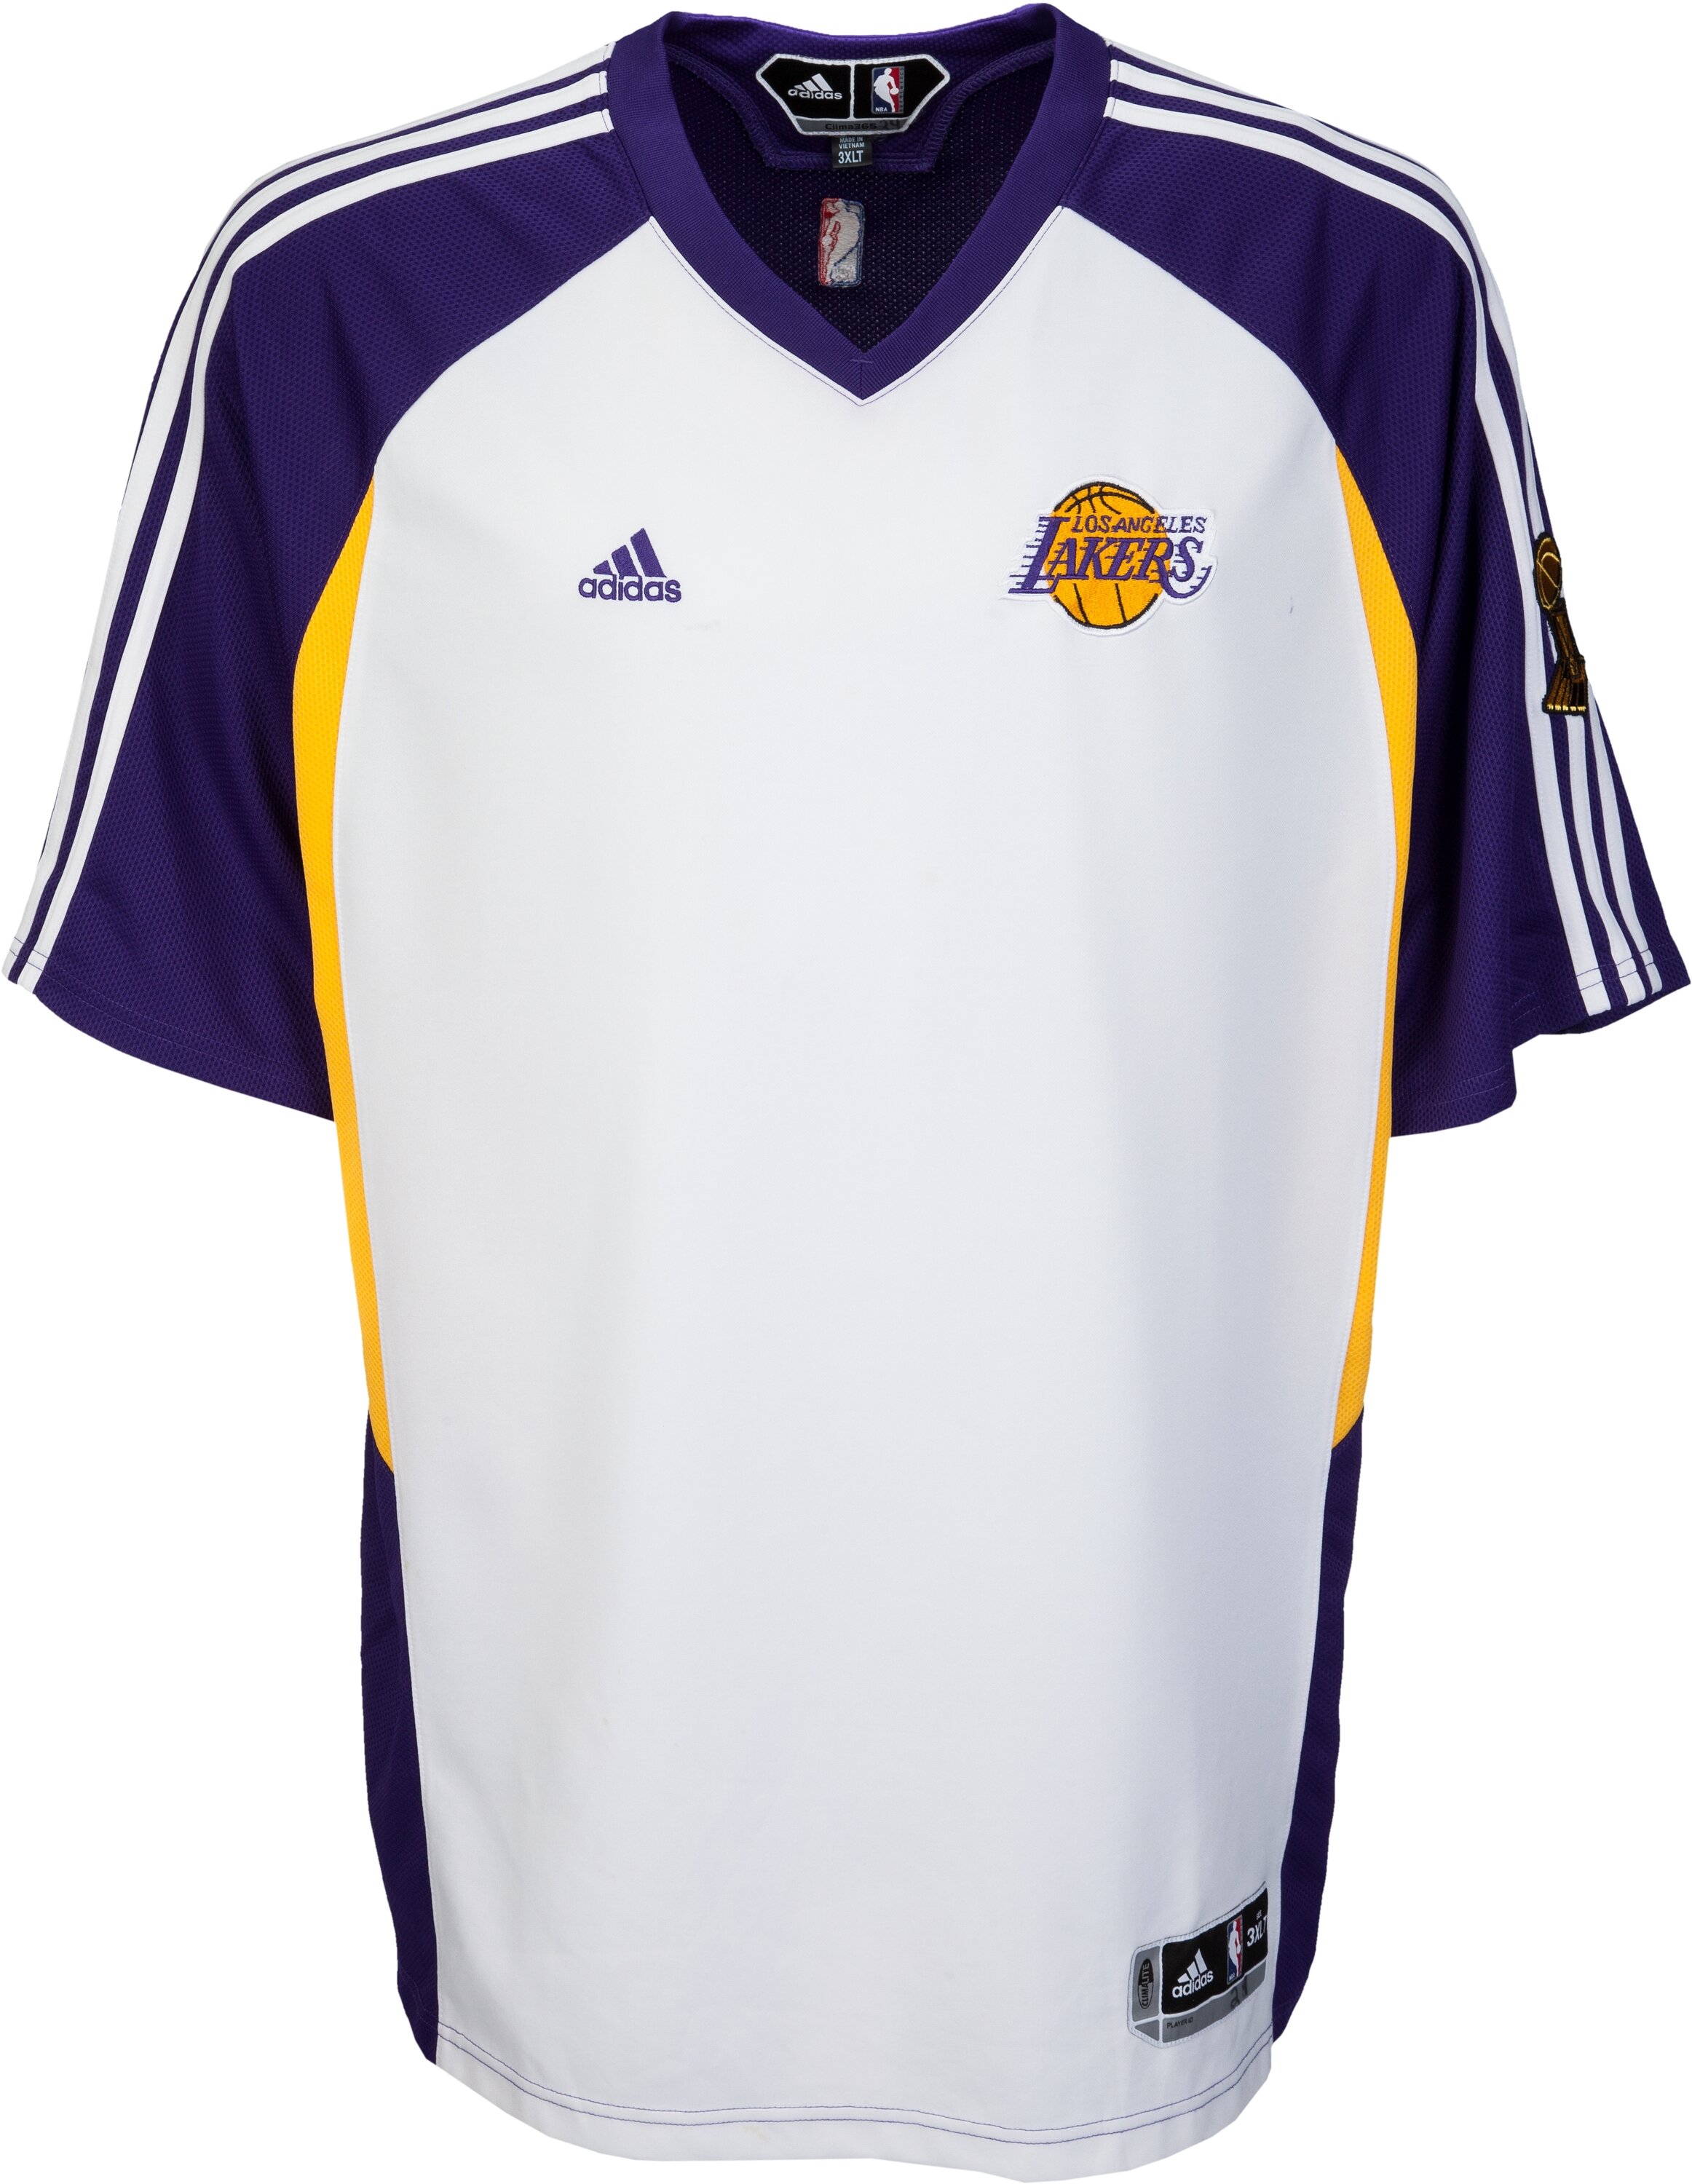 Kobe Bryant rookie jersey worn during NBA playoffs set to fetch up to £4m  at auction